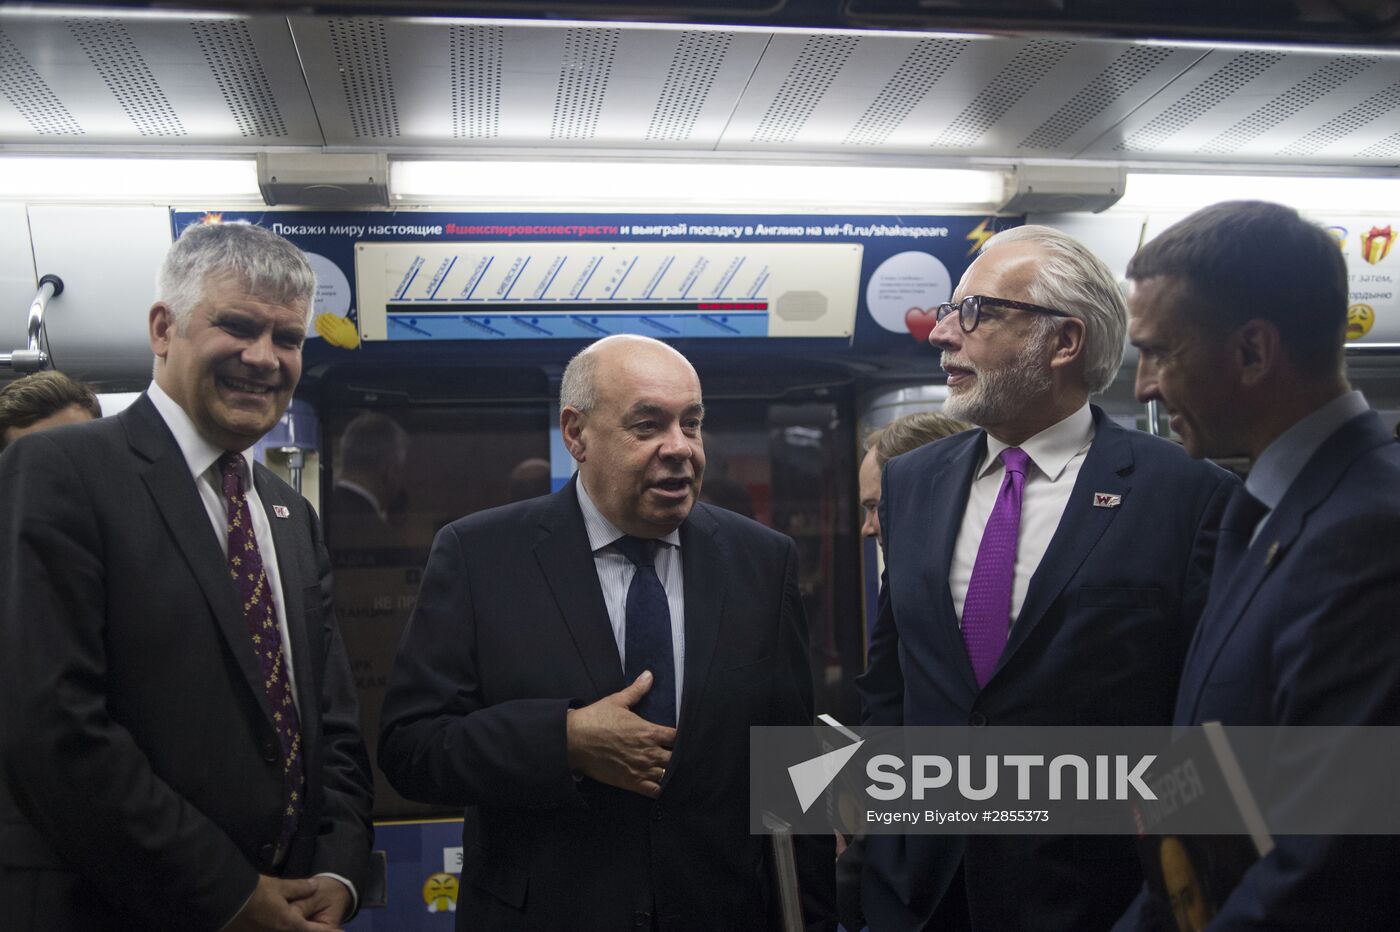 Head of British Council in Russia Michael Bird at ceremony of launching Metro Poetry Train with new, Sheakespeare's Passions" exposition